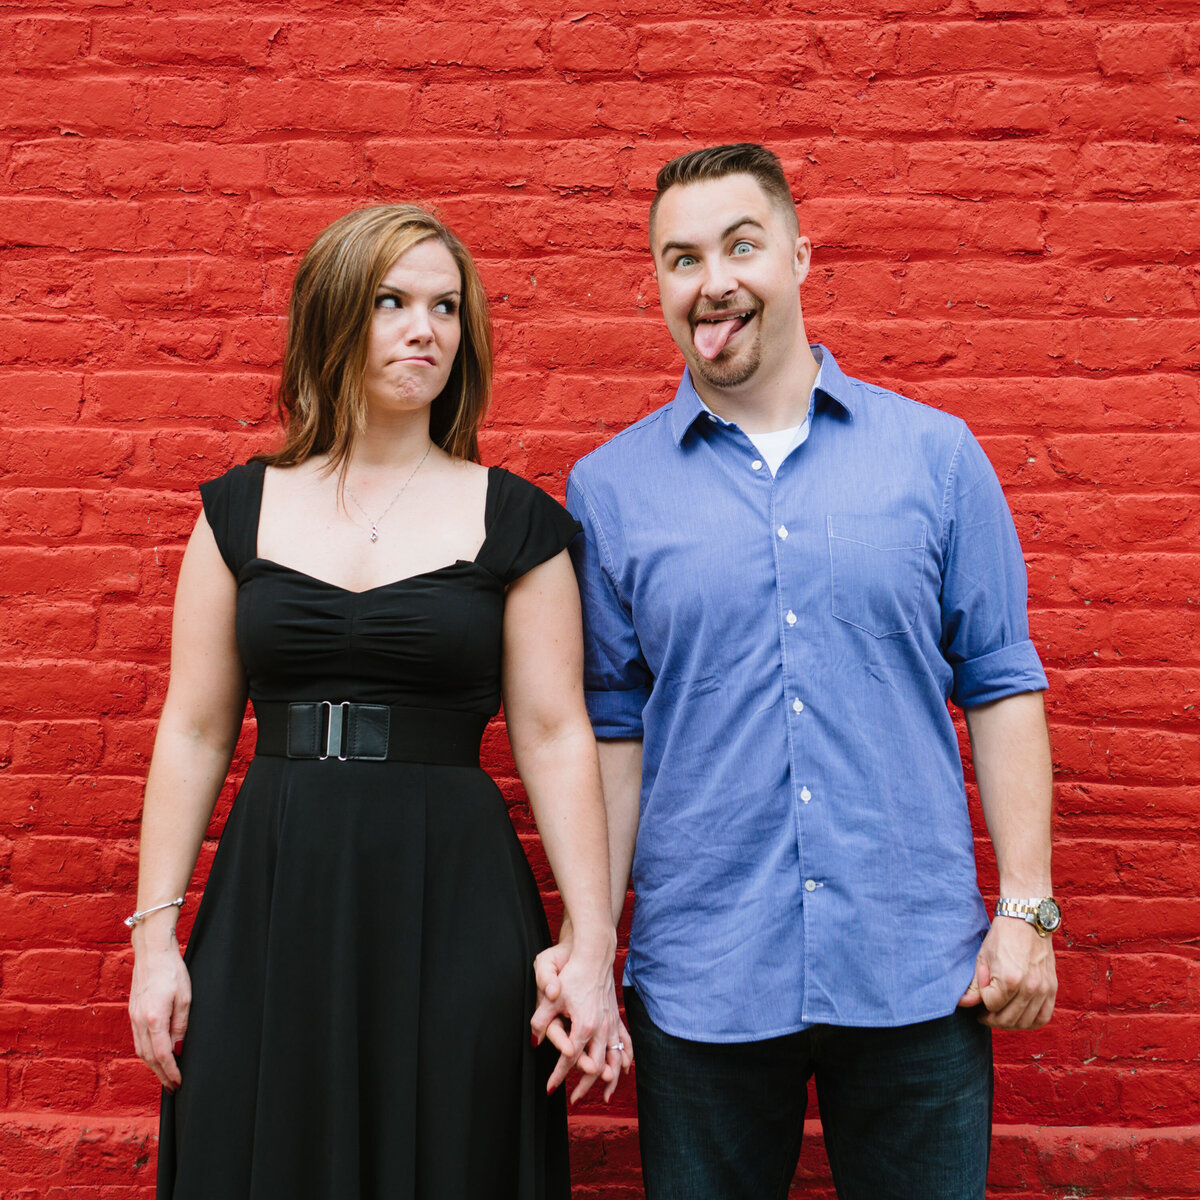 A couple holding hands and making funny faces while standing in front of a red wall.